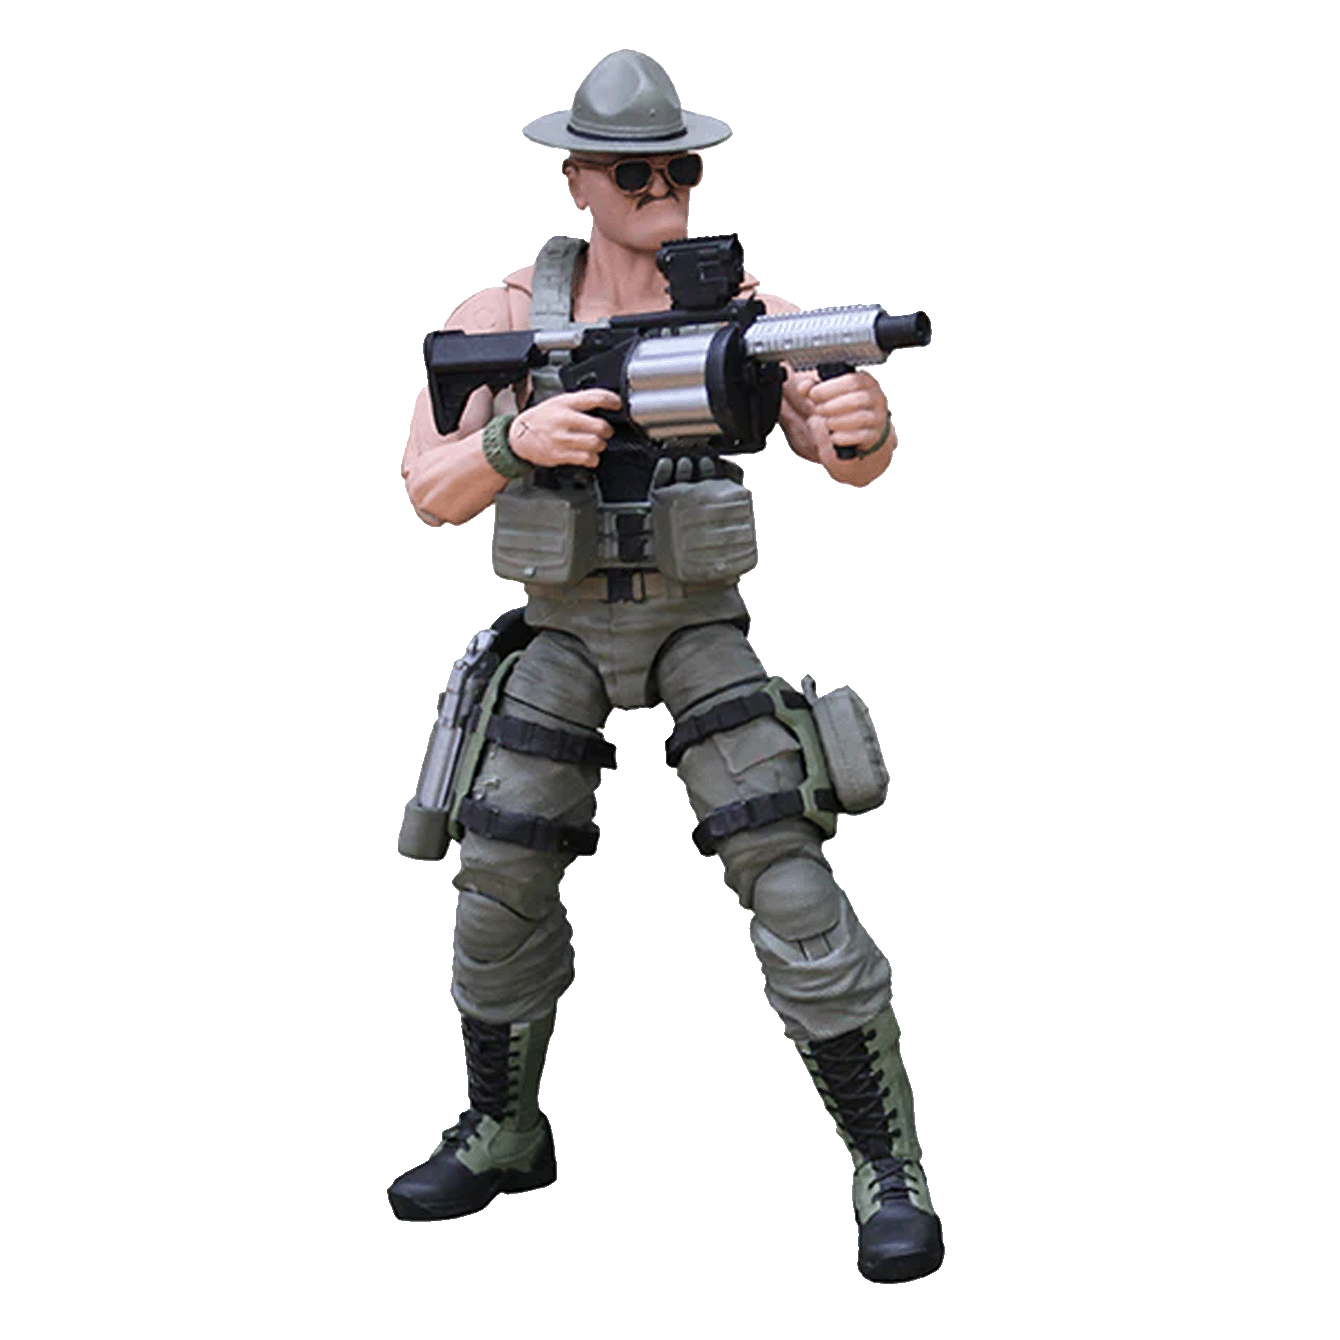 Valaverse Action Force Sgt Slaughter Version 2 6 Inch Action Figure